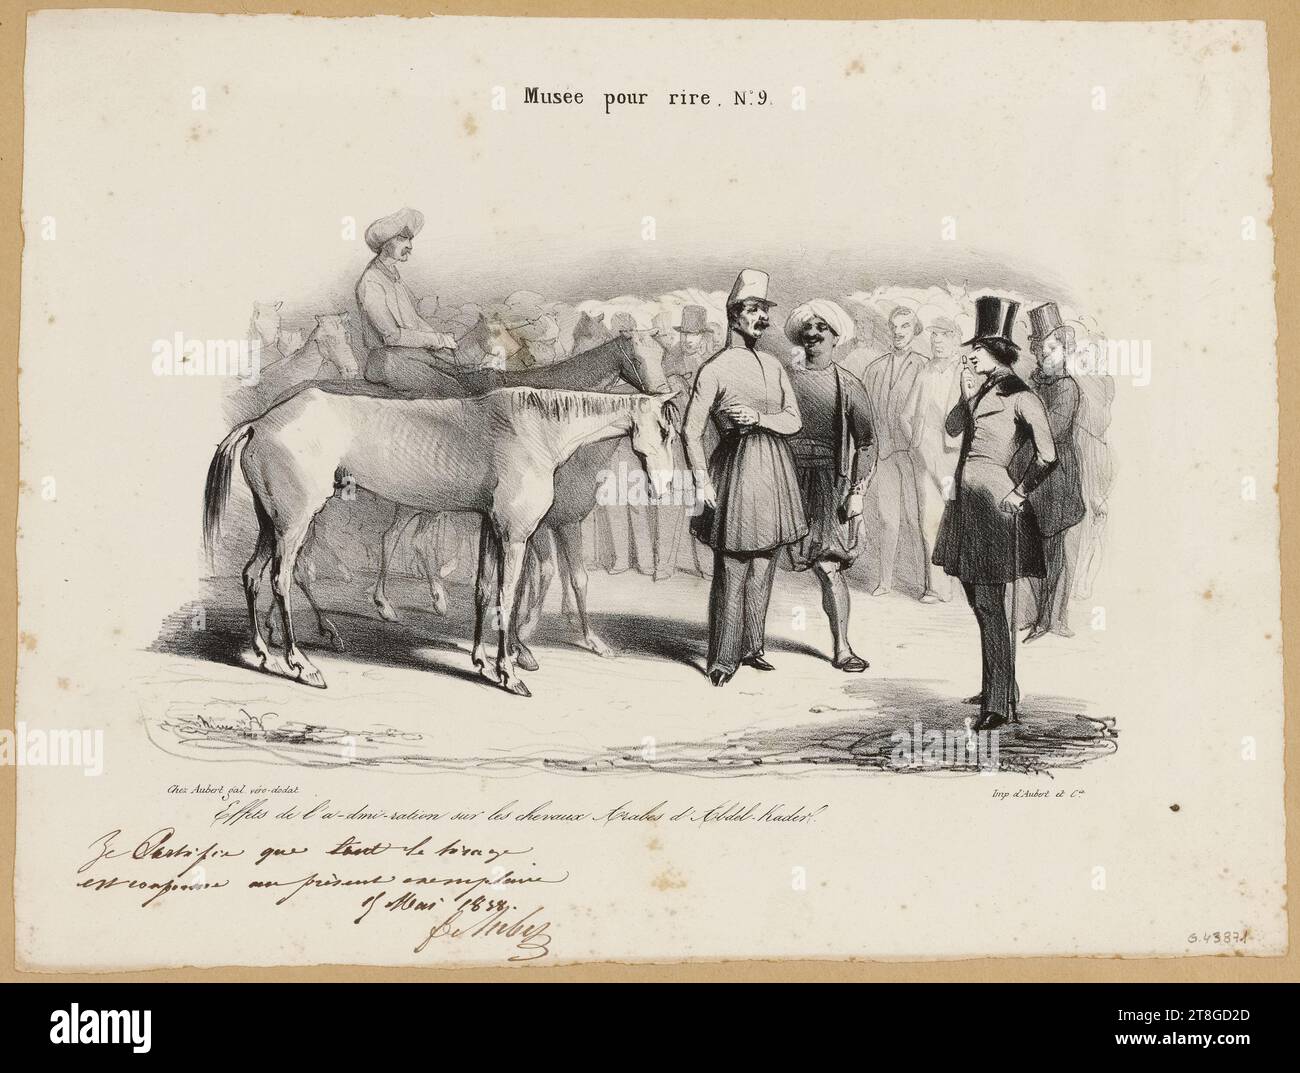 Museum for laughs. N°9, Effects of a-dmi-ration on Arab horses by Abdel-Kader, Draftsman-lithographer, Aubert et Cie, Publisher, After 1830, Print, Graphic arts, Print, Lithography, Dimensions - Work: Height: 27 cm, Width: 36 cm, Dimensions - Assembly:, Height: 32.7 cm, Width: 49.8 cm Stock Photo